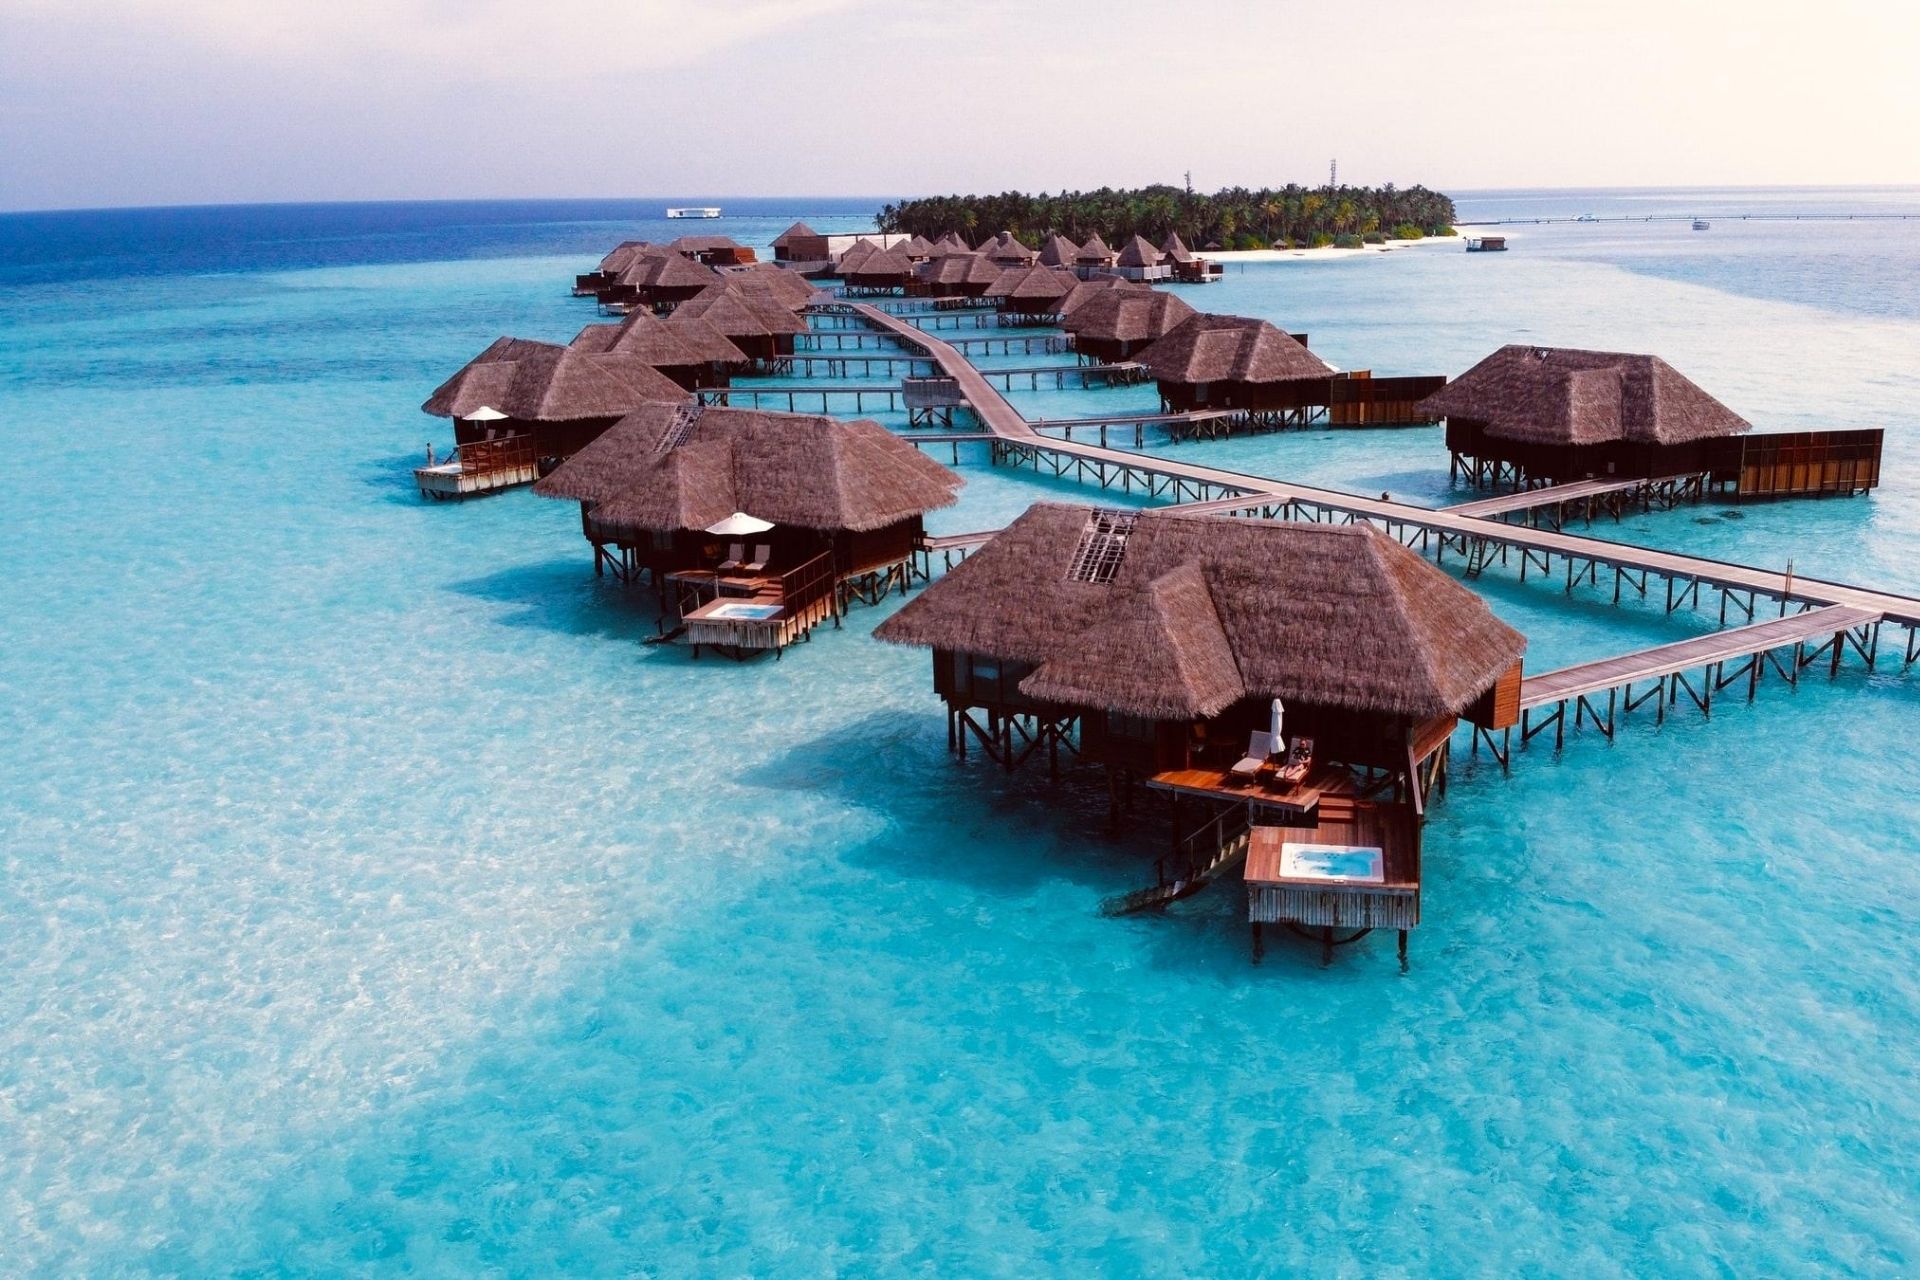 Maldives Tour Packages from India - Maldives Trip Cost in Indian